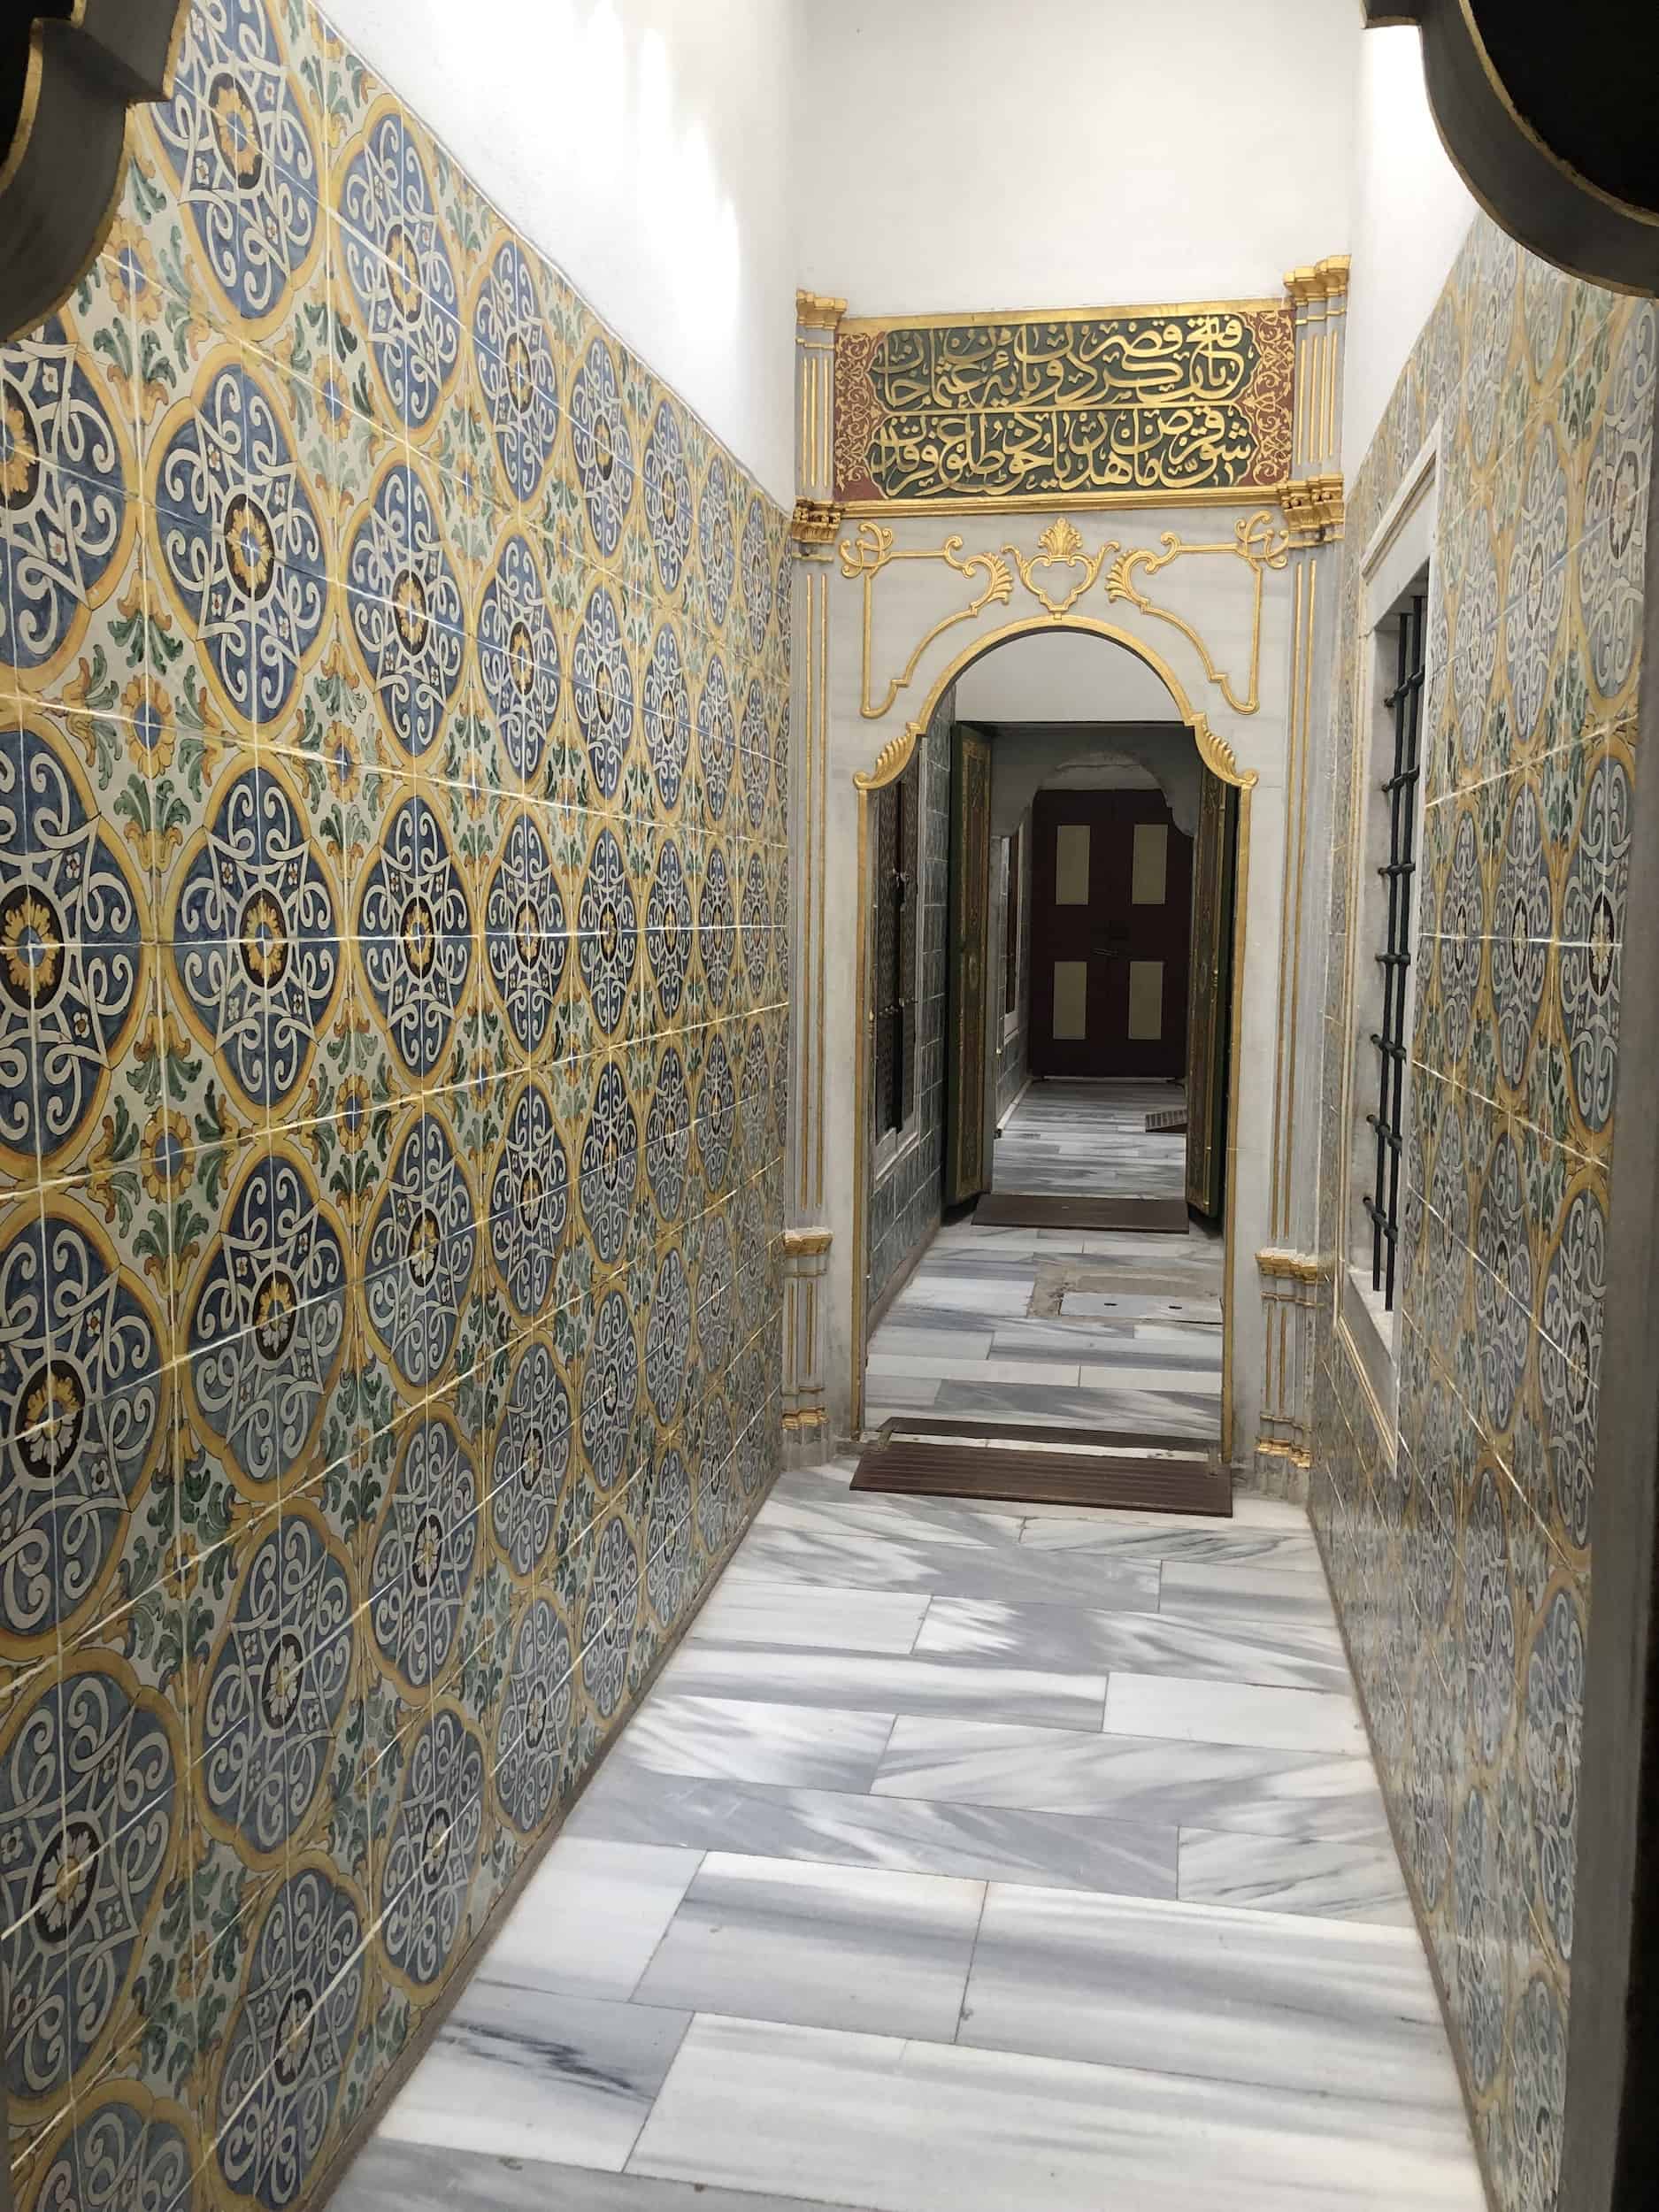 Tiled corridor in the Baths of the Sultan and Queen Mother in the Imperial Harem at Topkapi Palace in Istanbul, Turkey